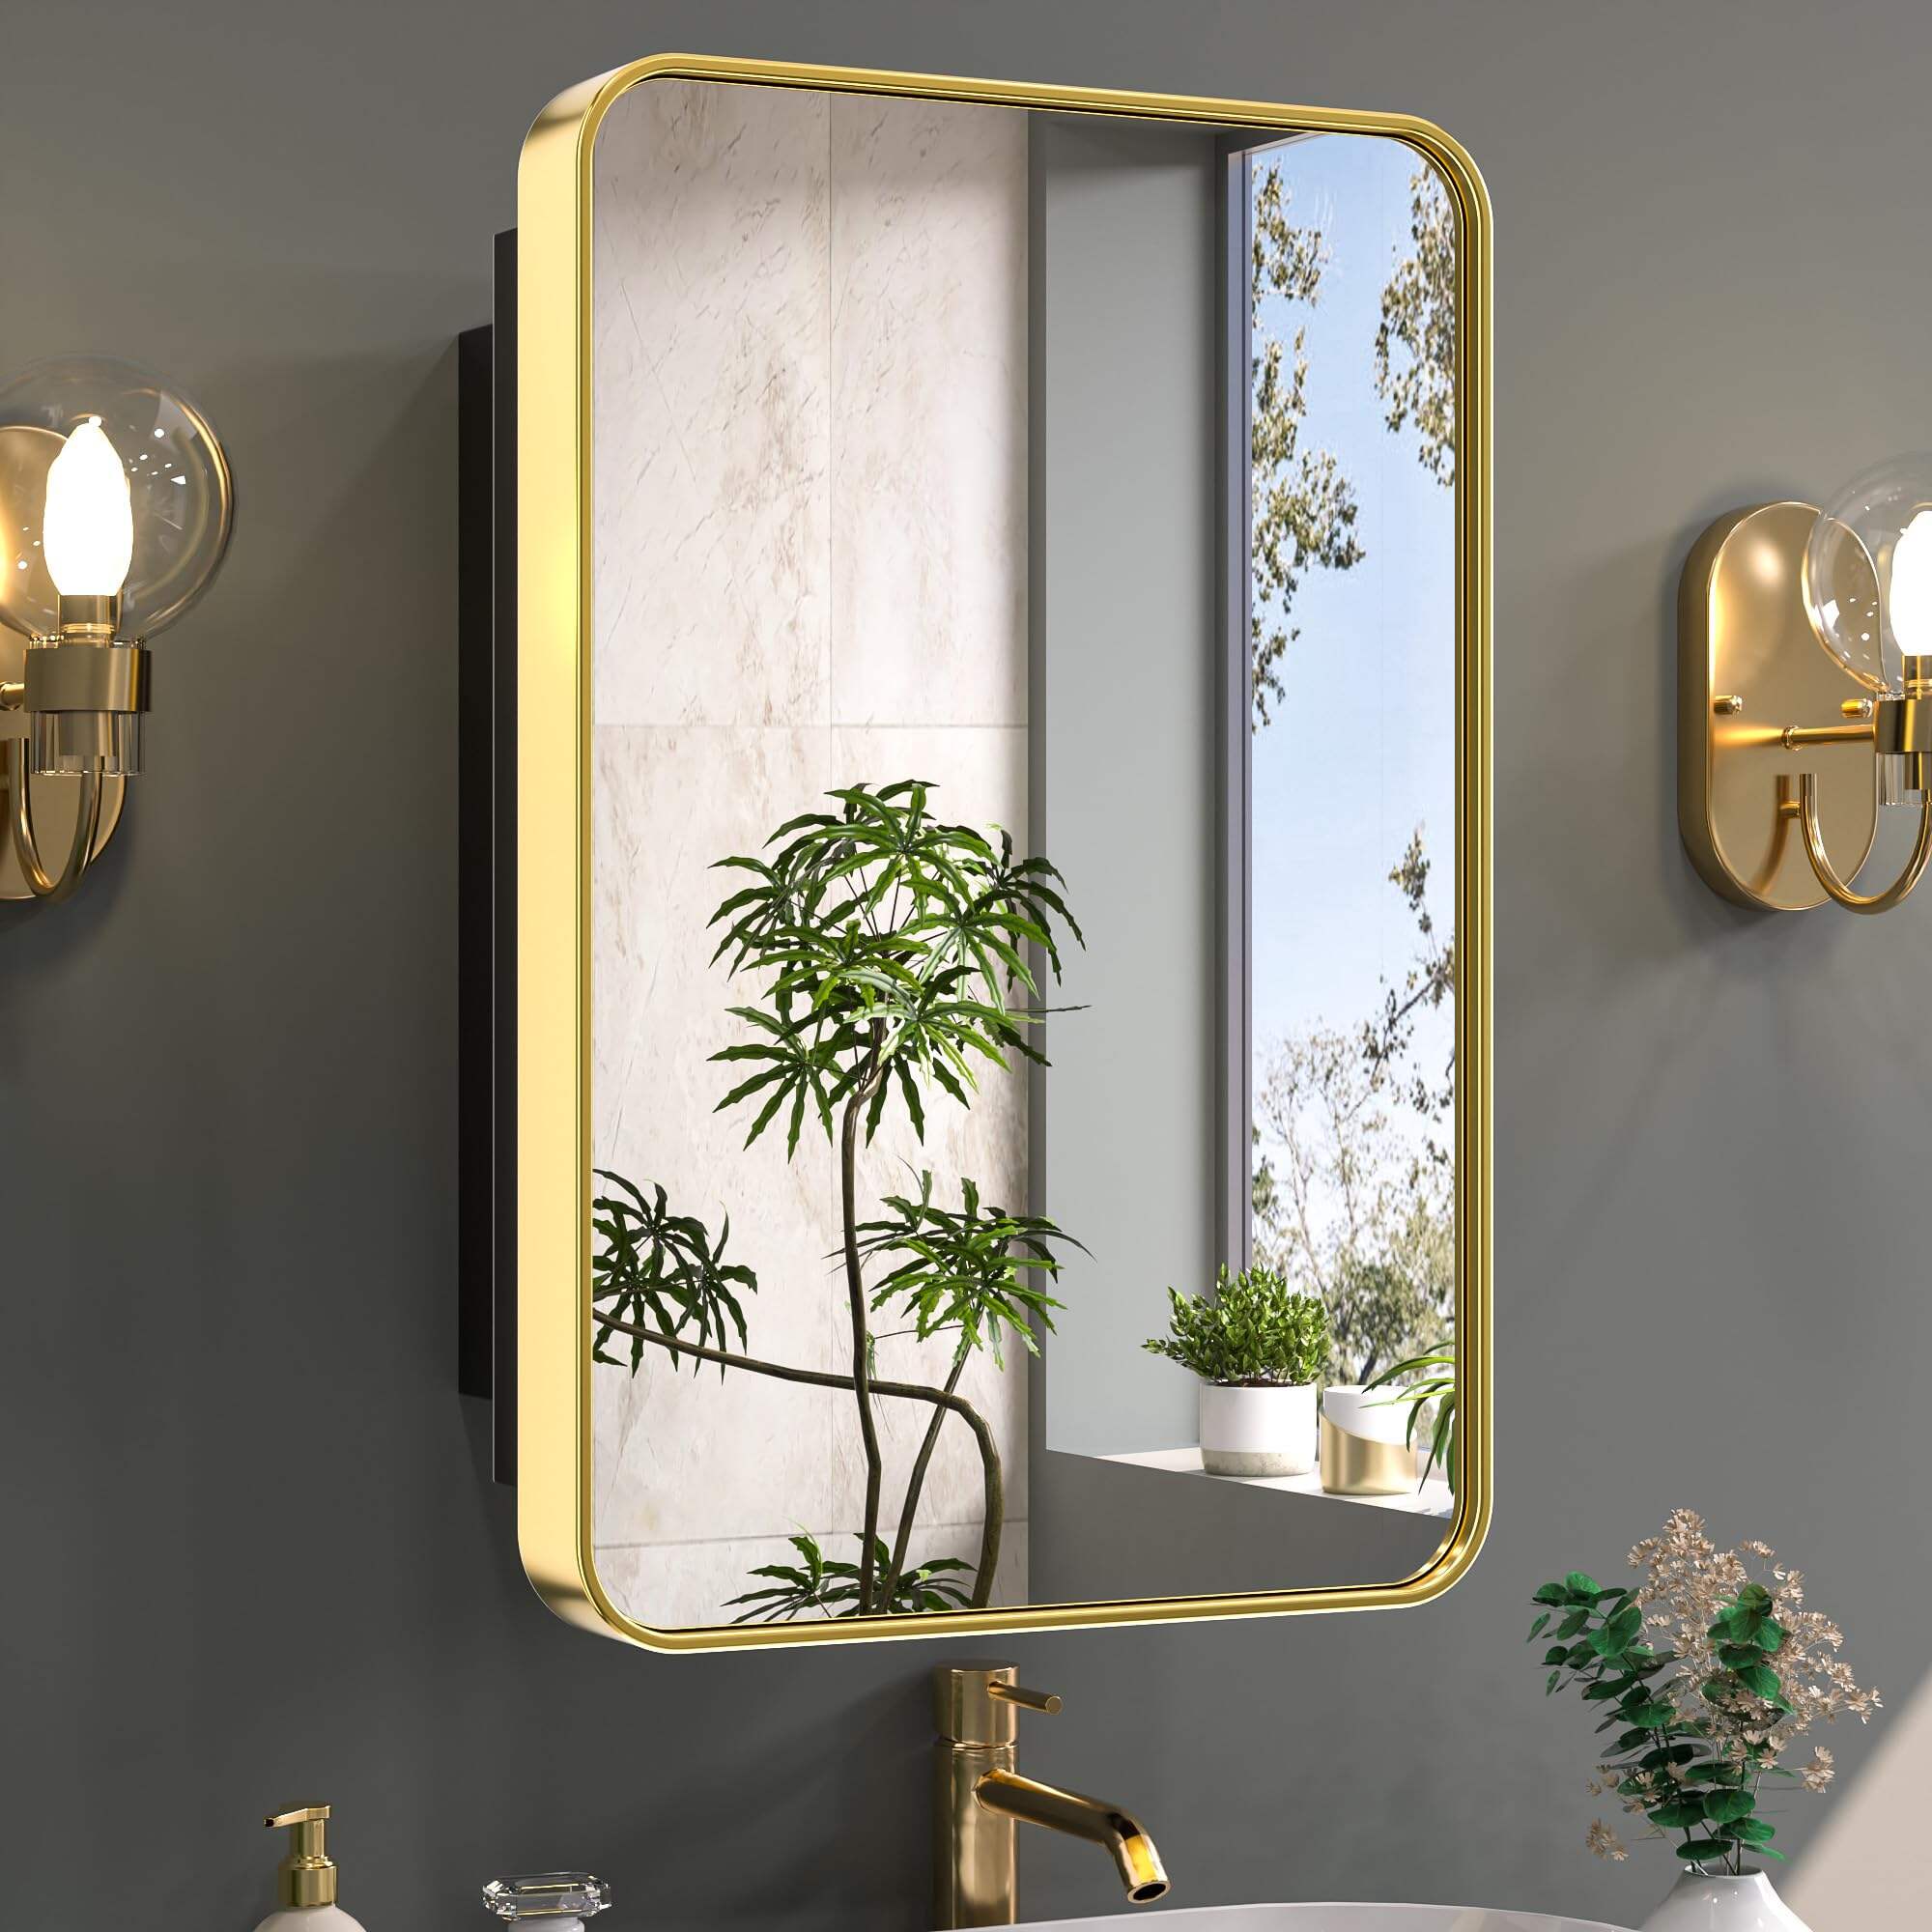 Foshan Haohan Smart Home Co., Ltd. 16 x 24 Inch Gold Medicine Cabinets for Bathroom with Mirror Stainless Steel Framed Surface Modern Farmhouse Rounded Rectangle Single Door Small Wall-mounted Recessed Bathroom Storage Cabinet